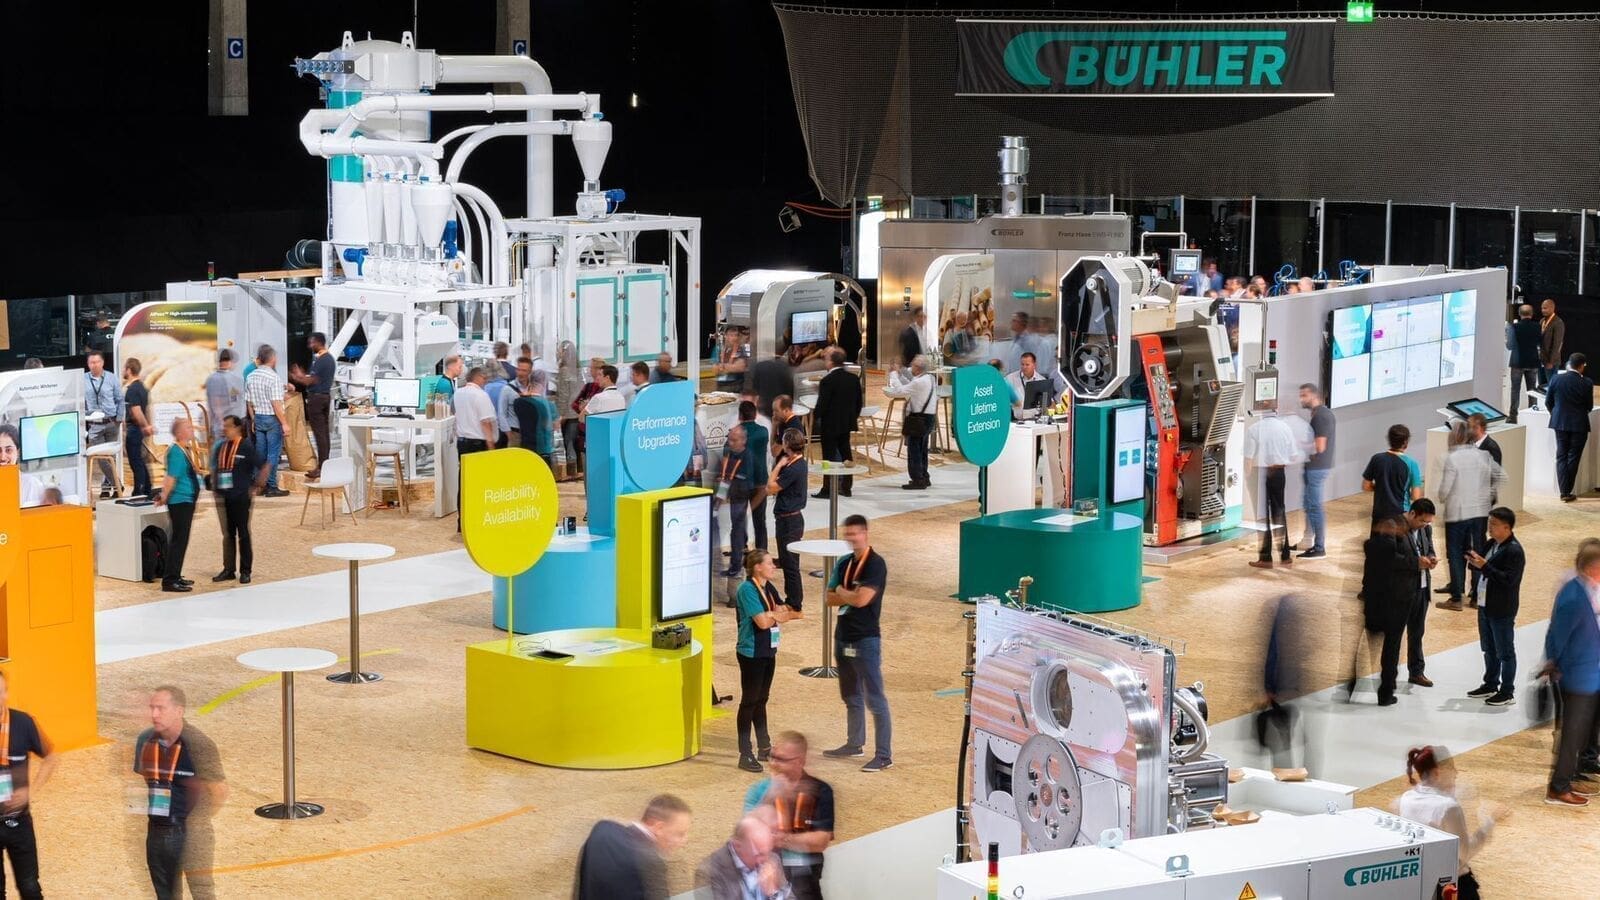 Bühler Networking Days 2022 announced, with focus on insects, pulses, bioprocessing, upcycling, e-mobility and zero emissions ￼